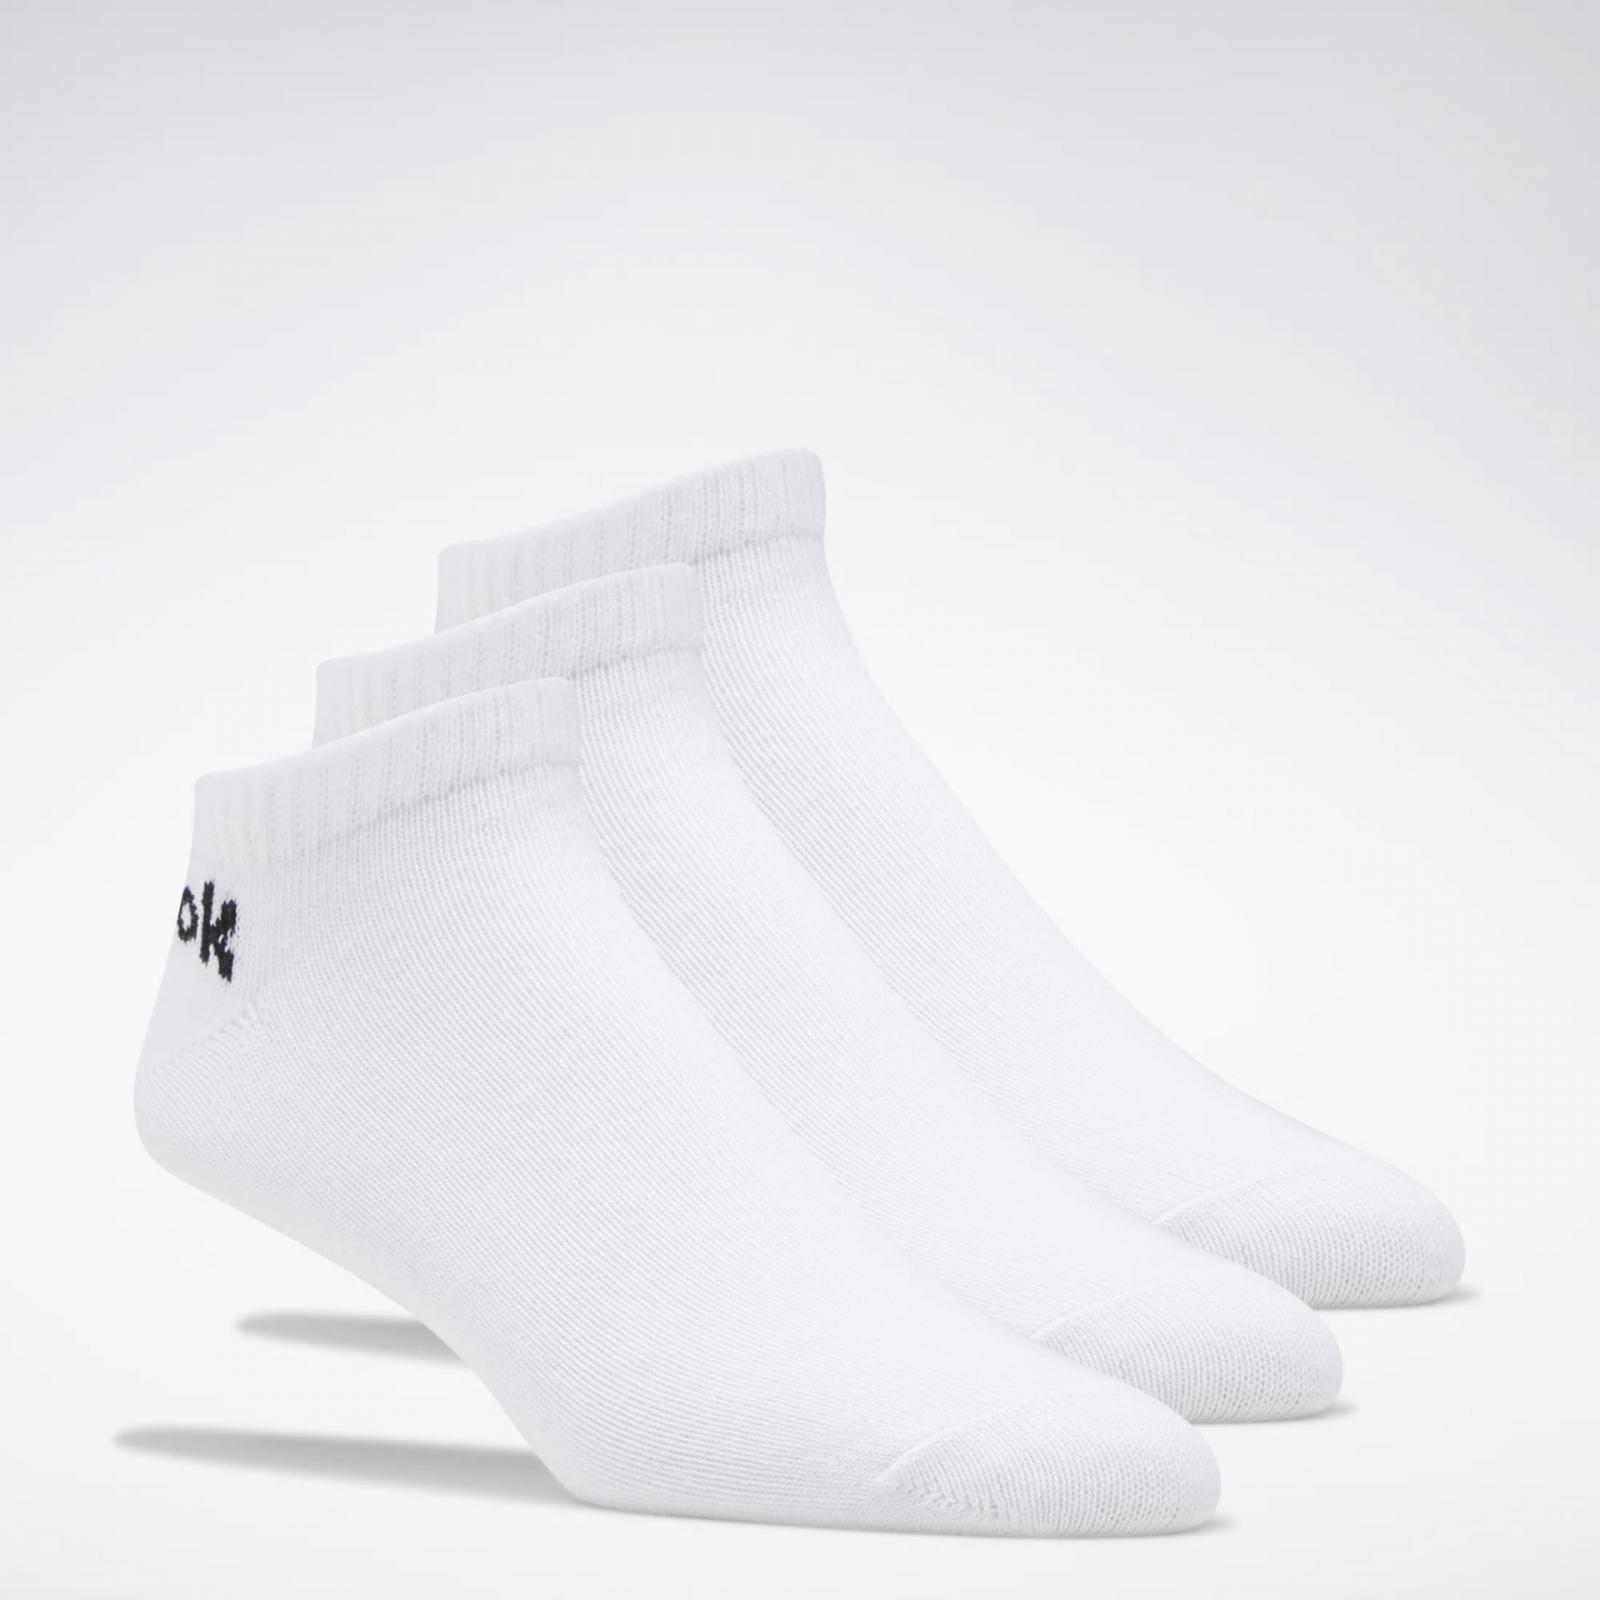 3 Pack pour femme Formation Chaussettes-Blanc Reebok One Series